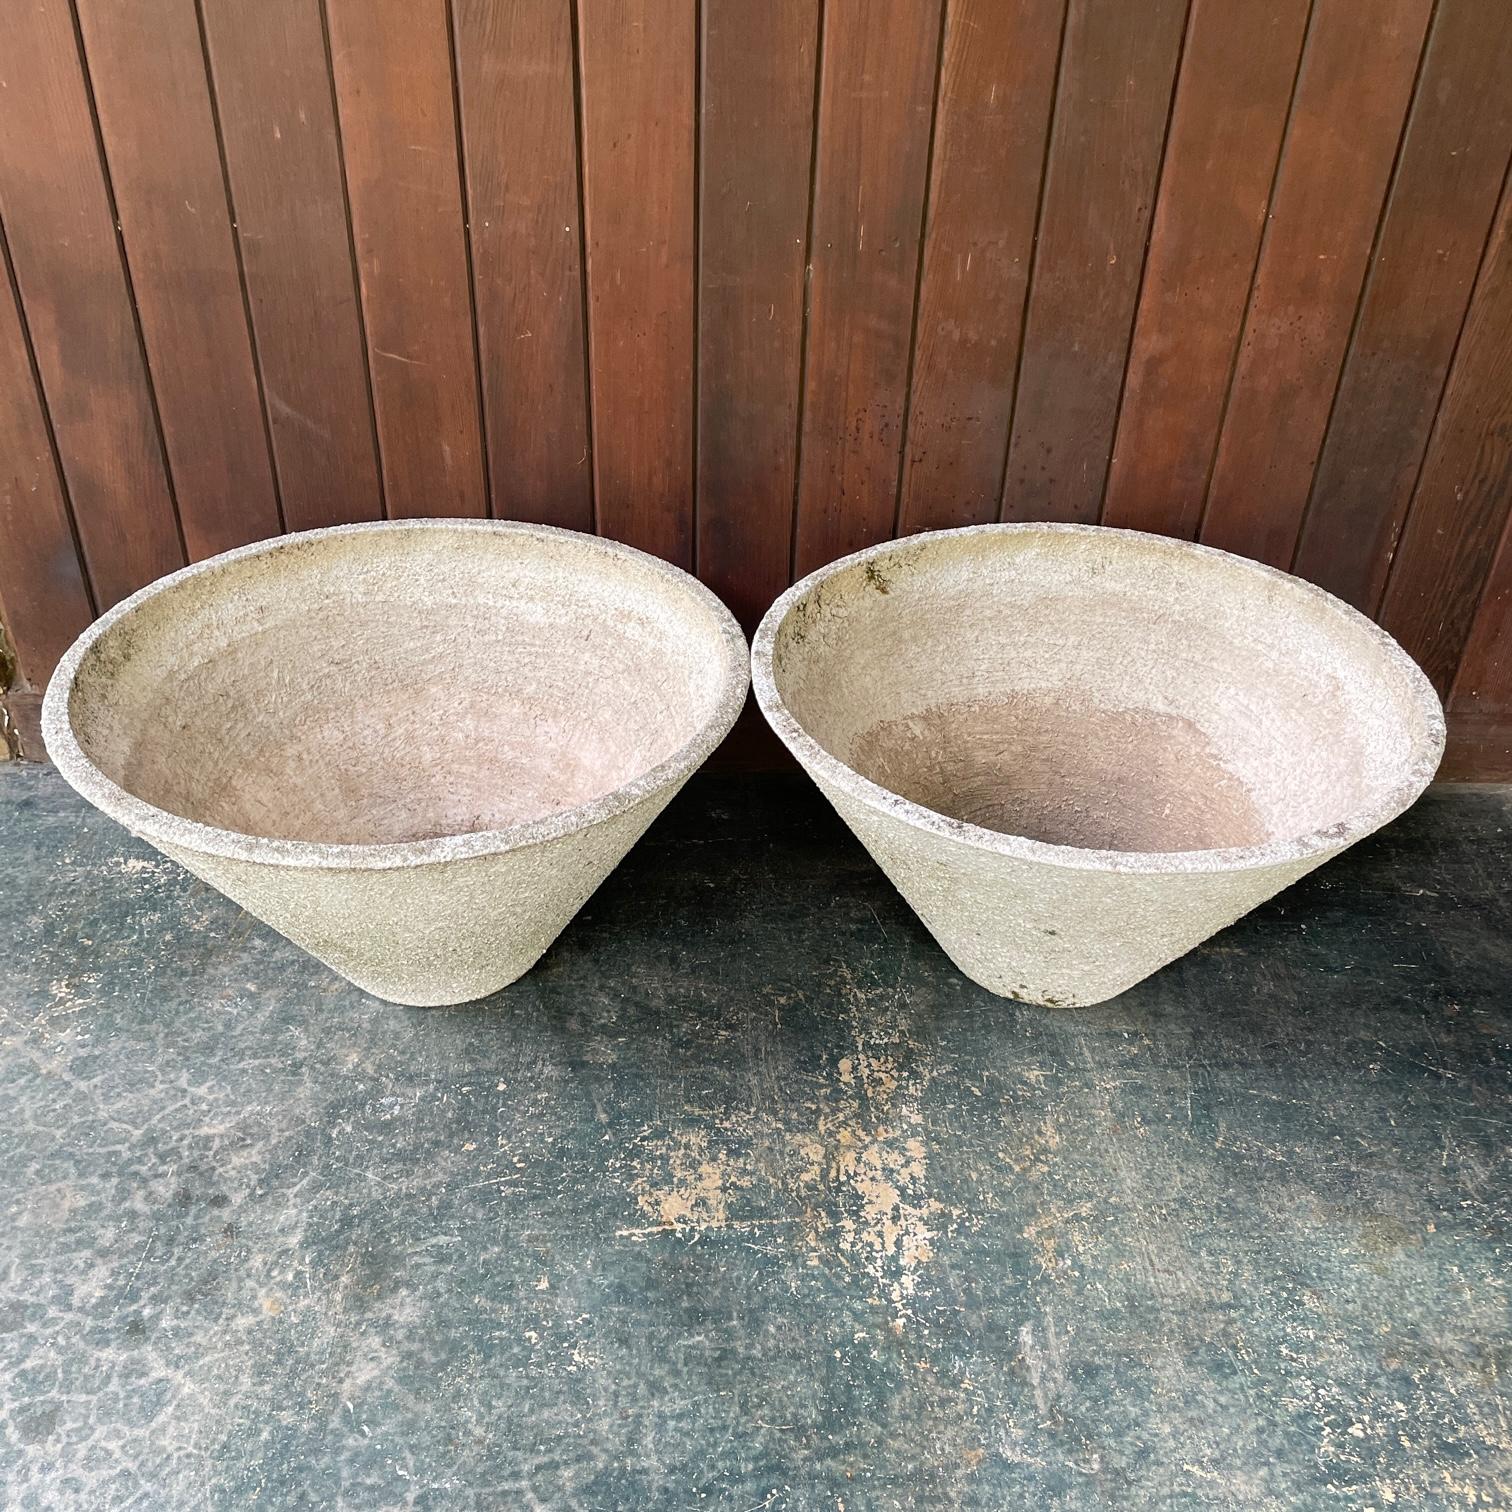 Swiss 1960s Massive Coned Planters Pair by Willy Guhl for Eternit, California Style For Sale